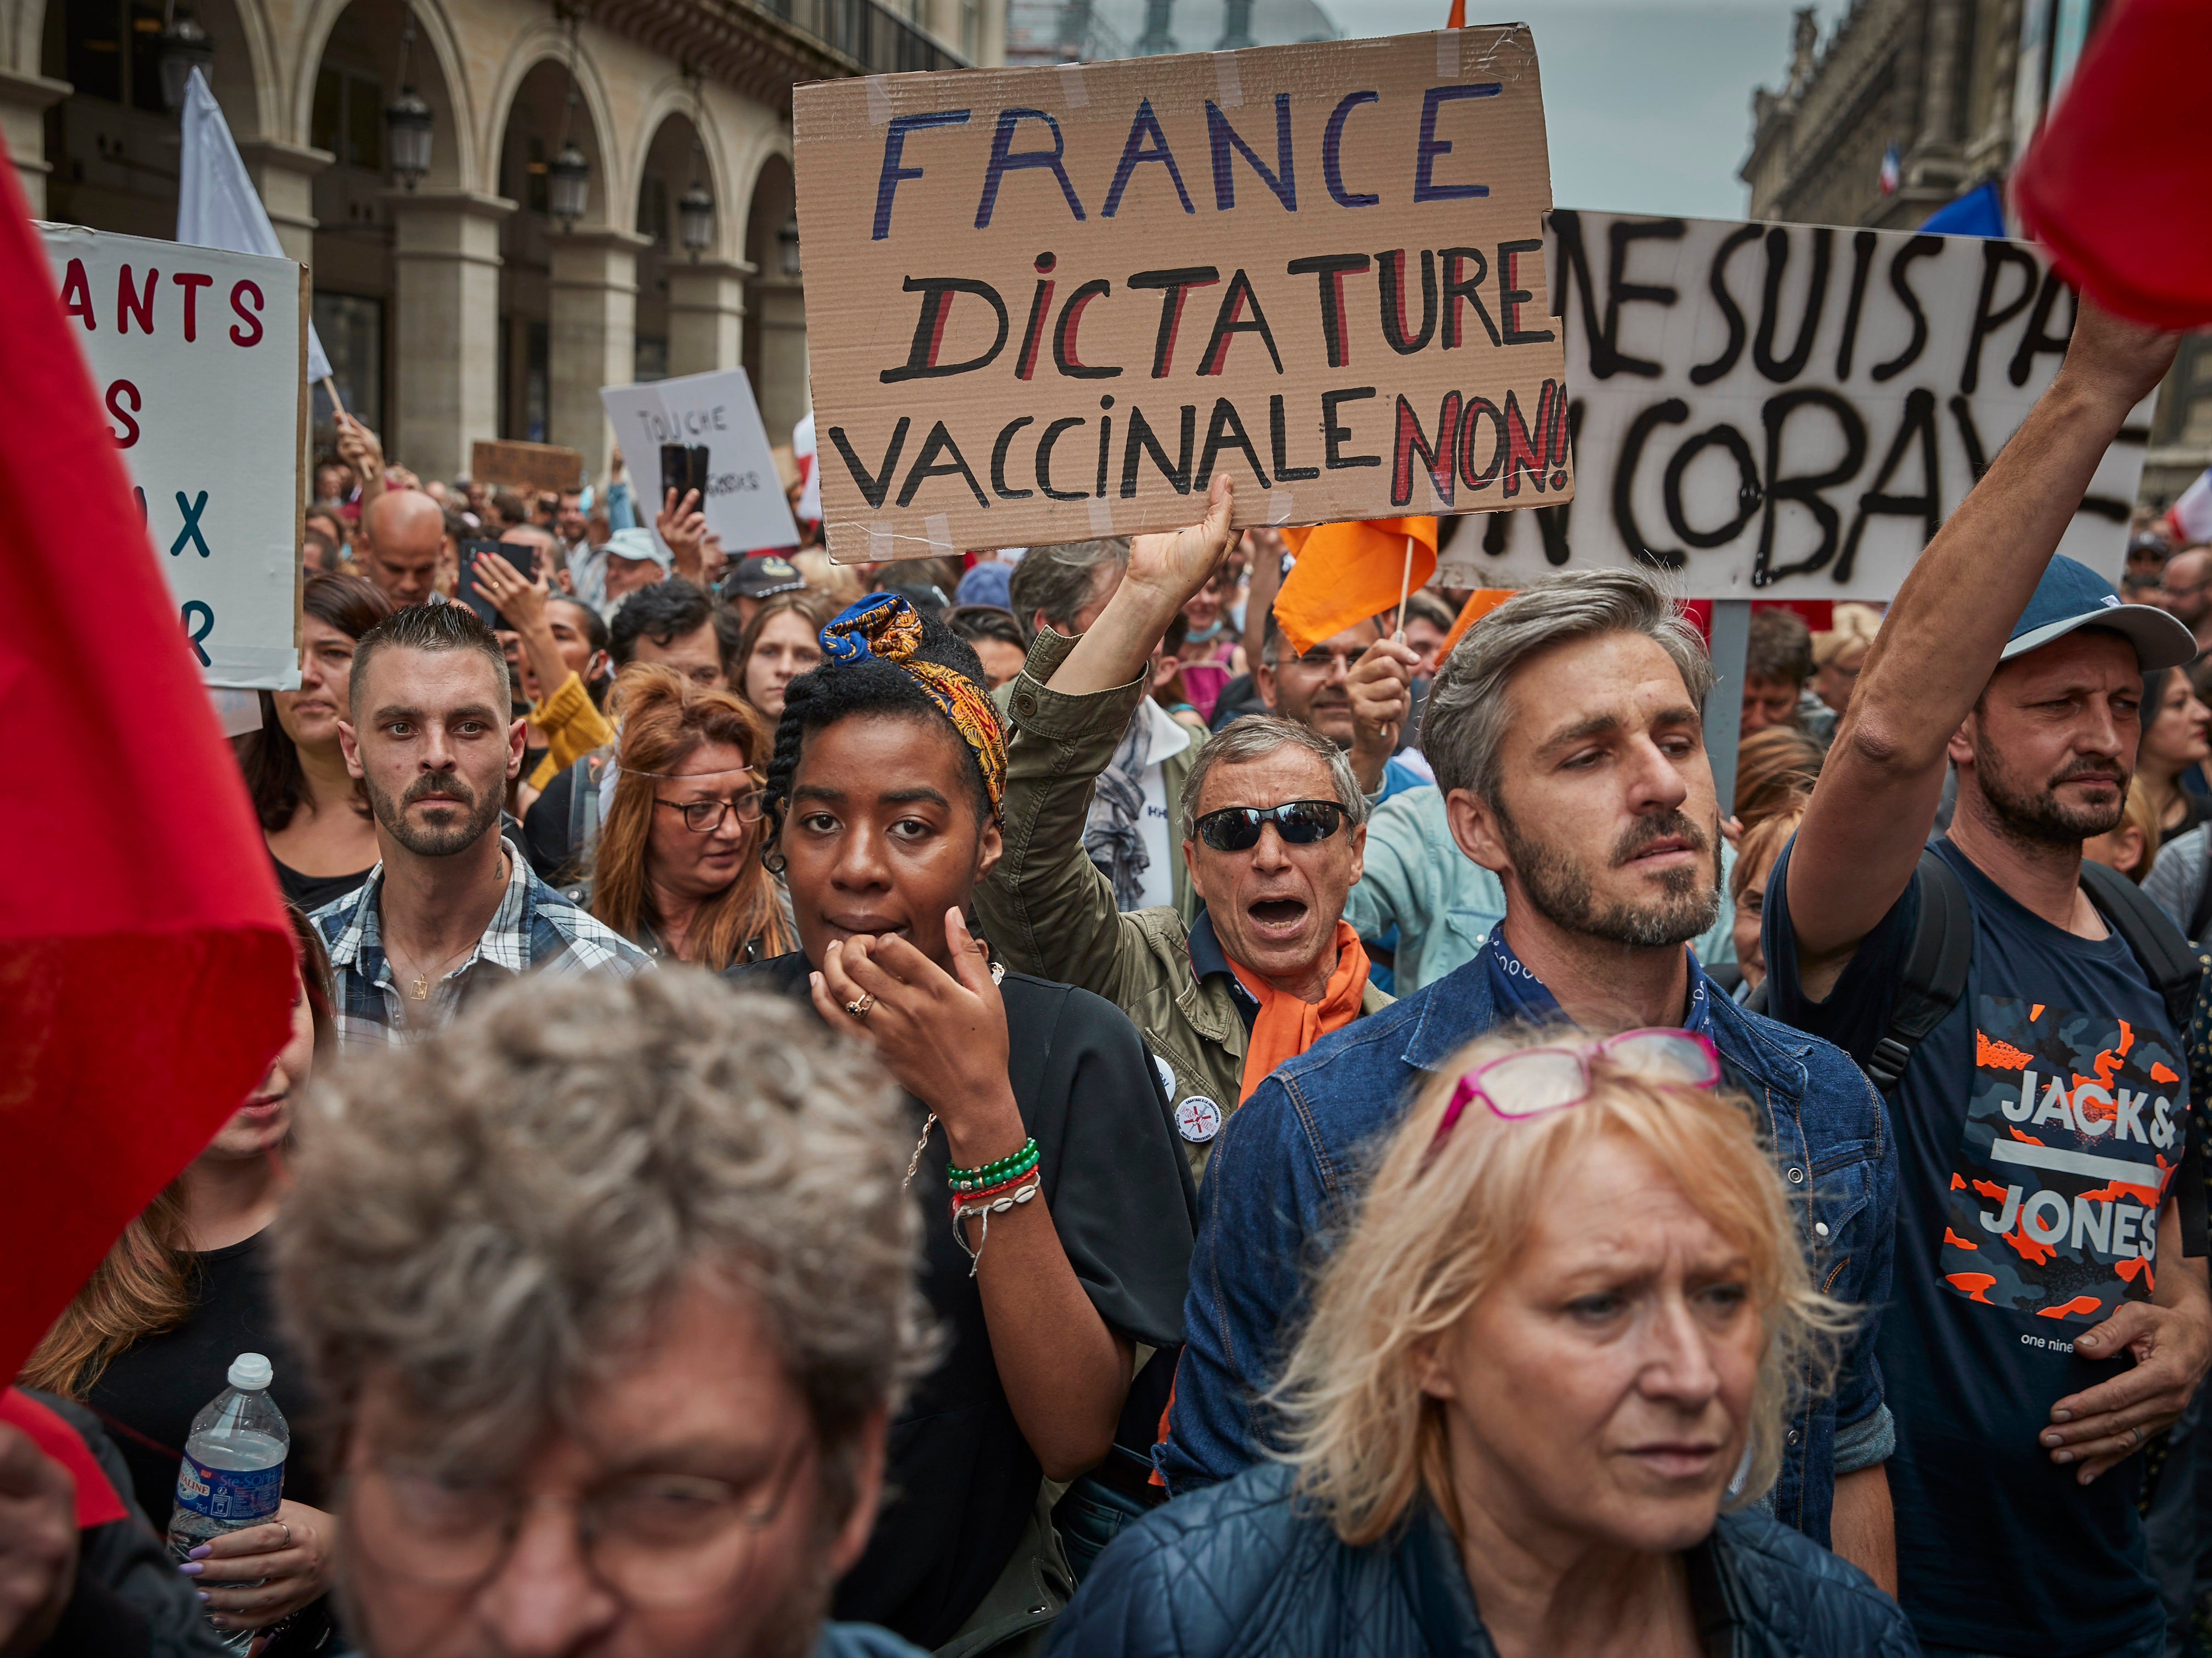 Anti-vaccine protesters march through the streets of Paris